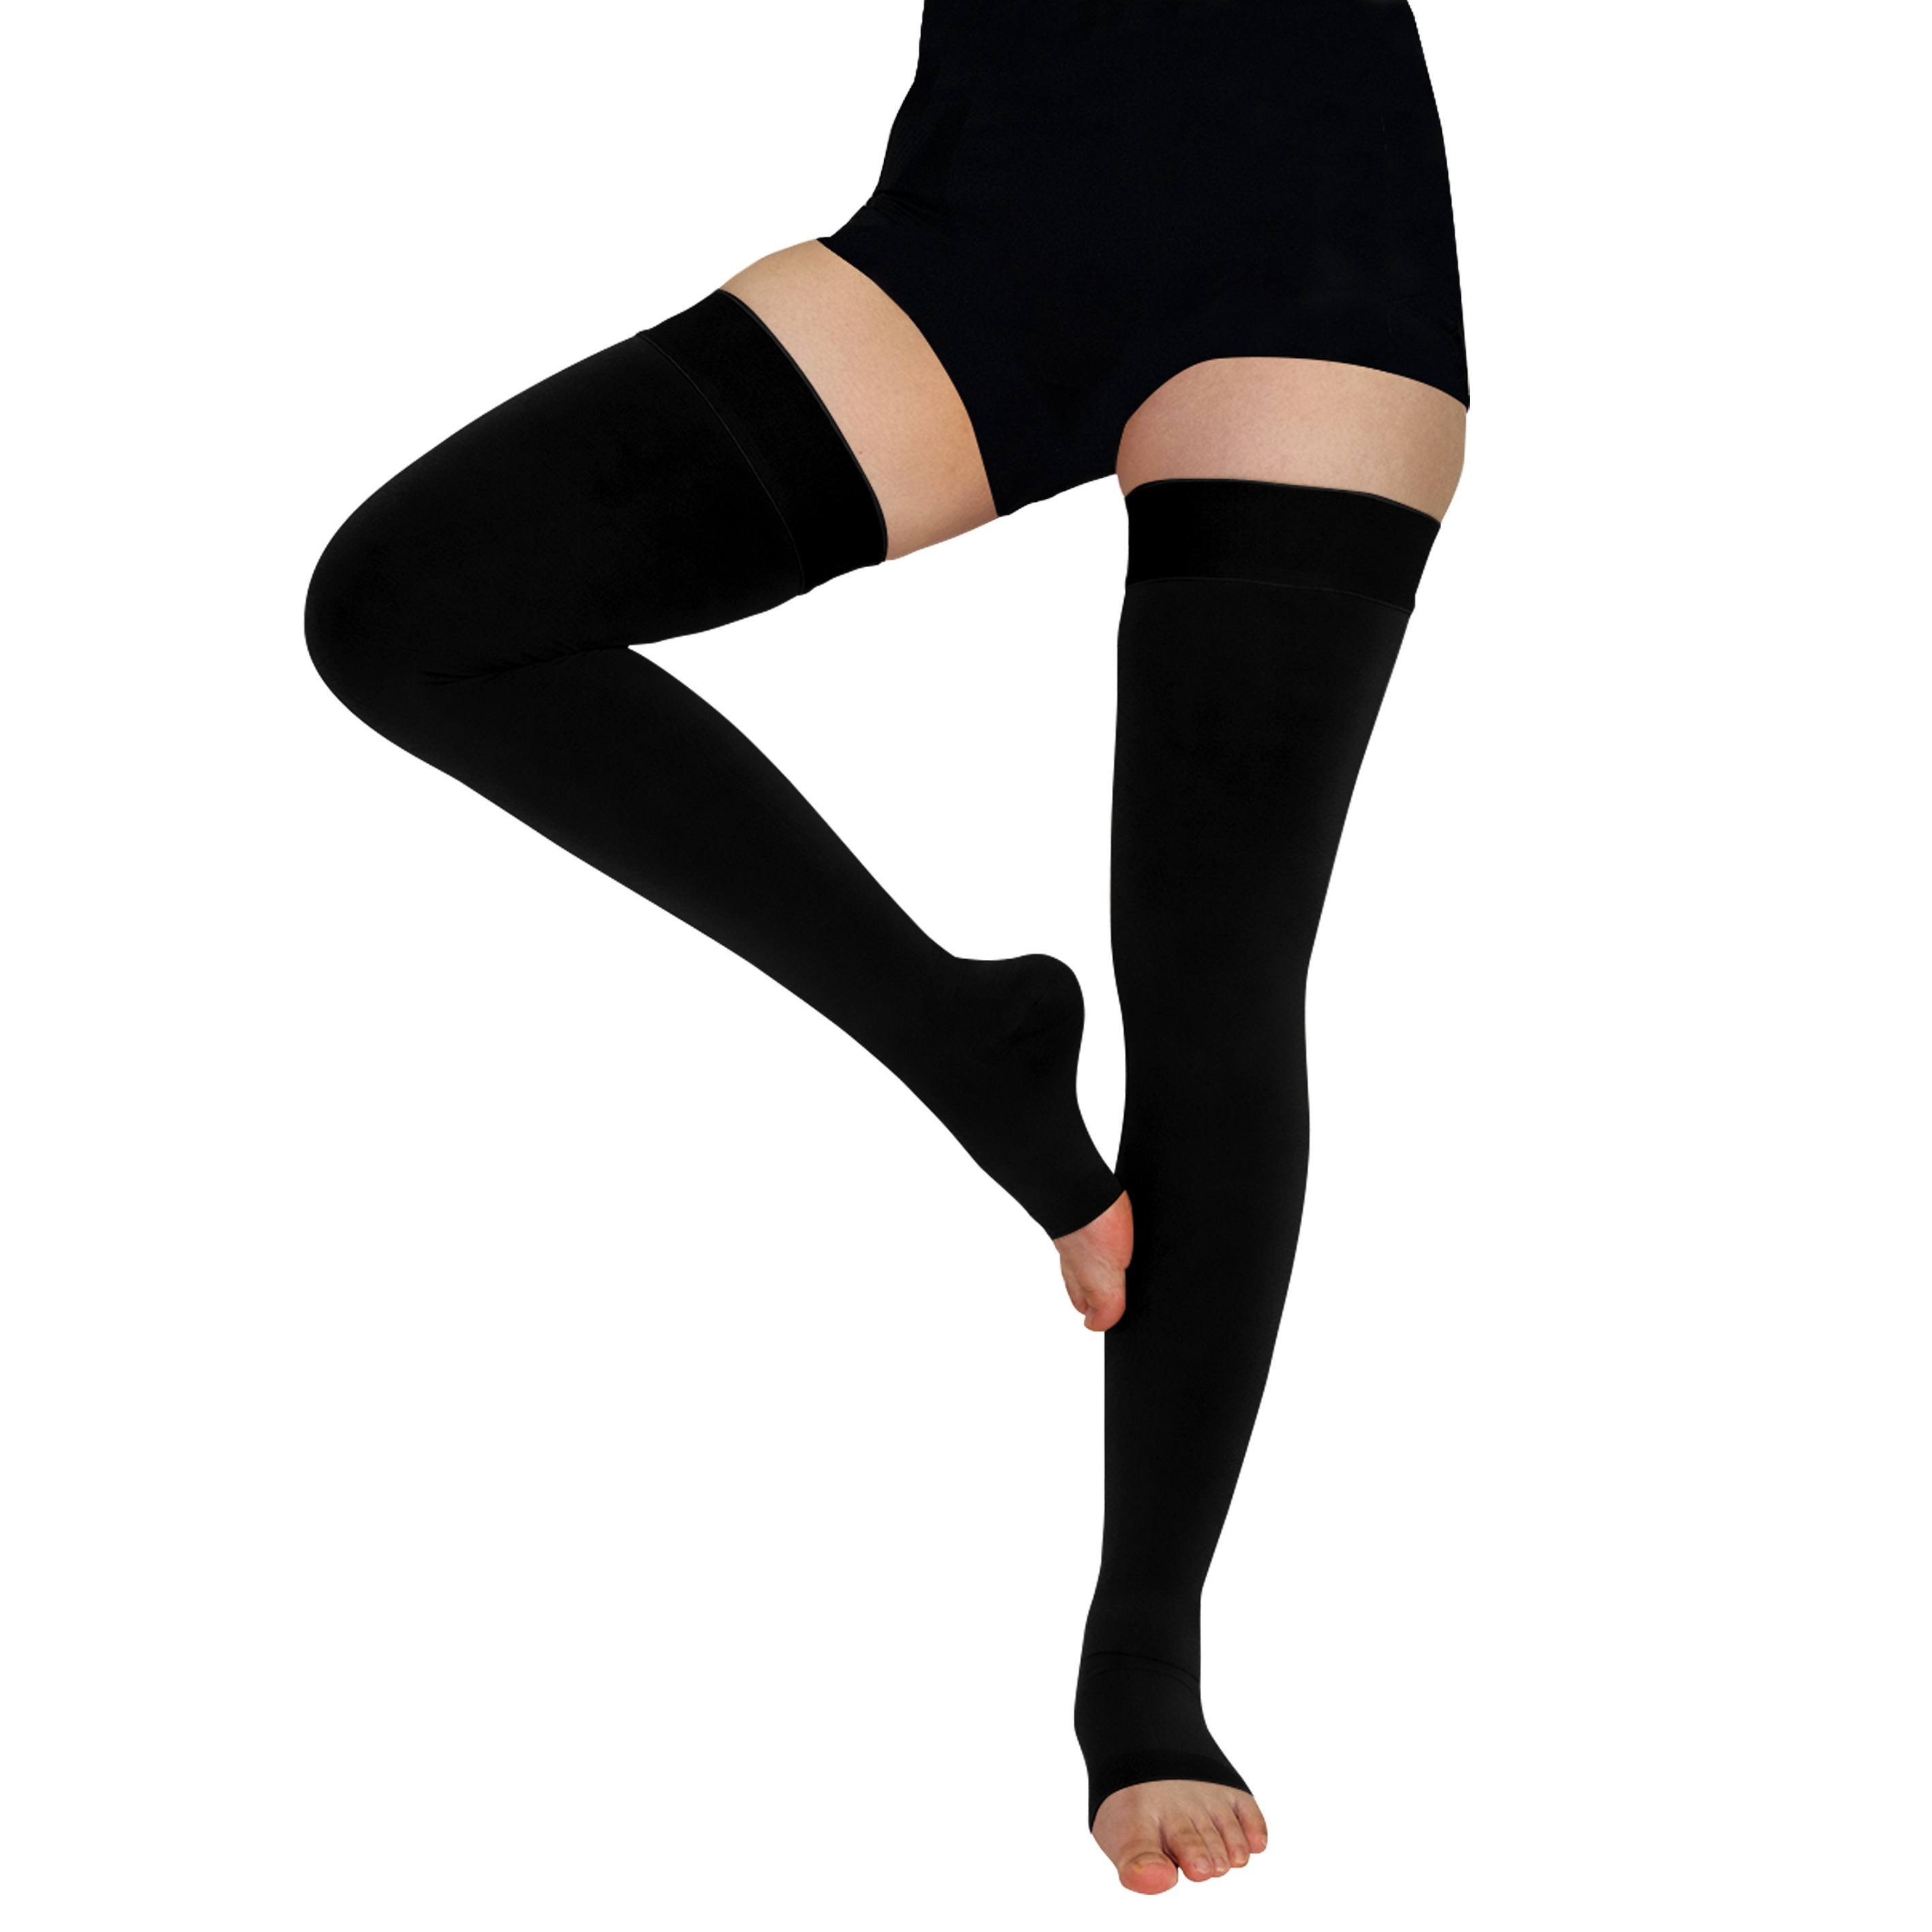  Beister 1 Pair Medical Open Toe Thigh High Compression  Stockings with Silicone Band for Women & Men, Firm 20-30 mmHg Graduated  Support for Varicose Veins, Edema, Flight. : Health & Household